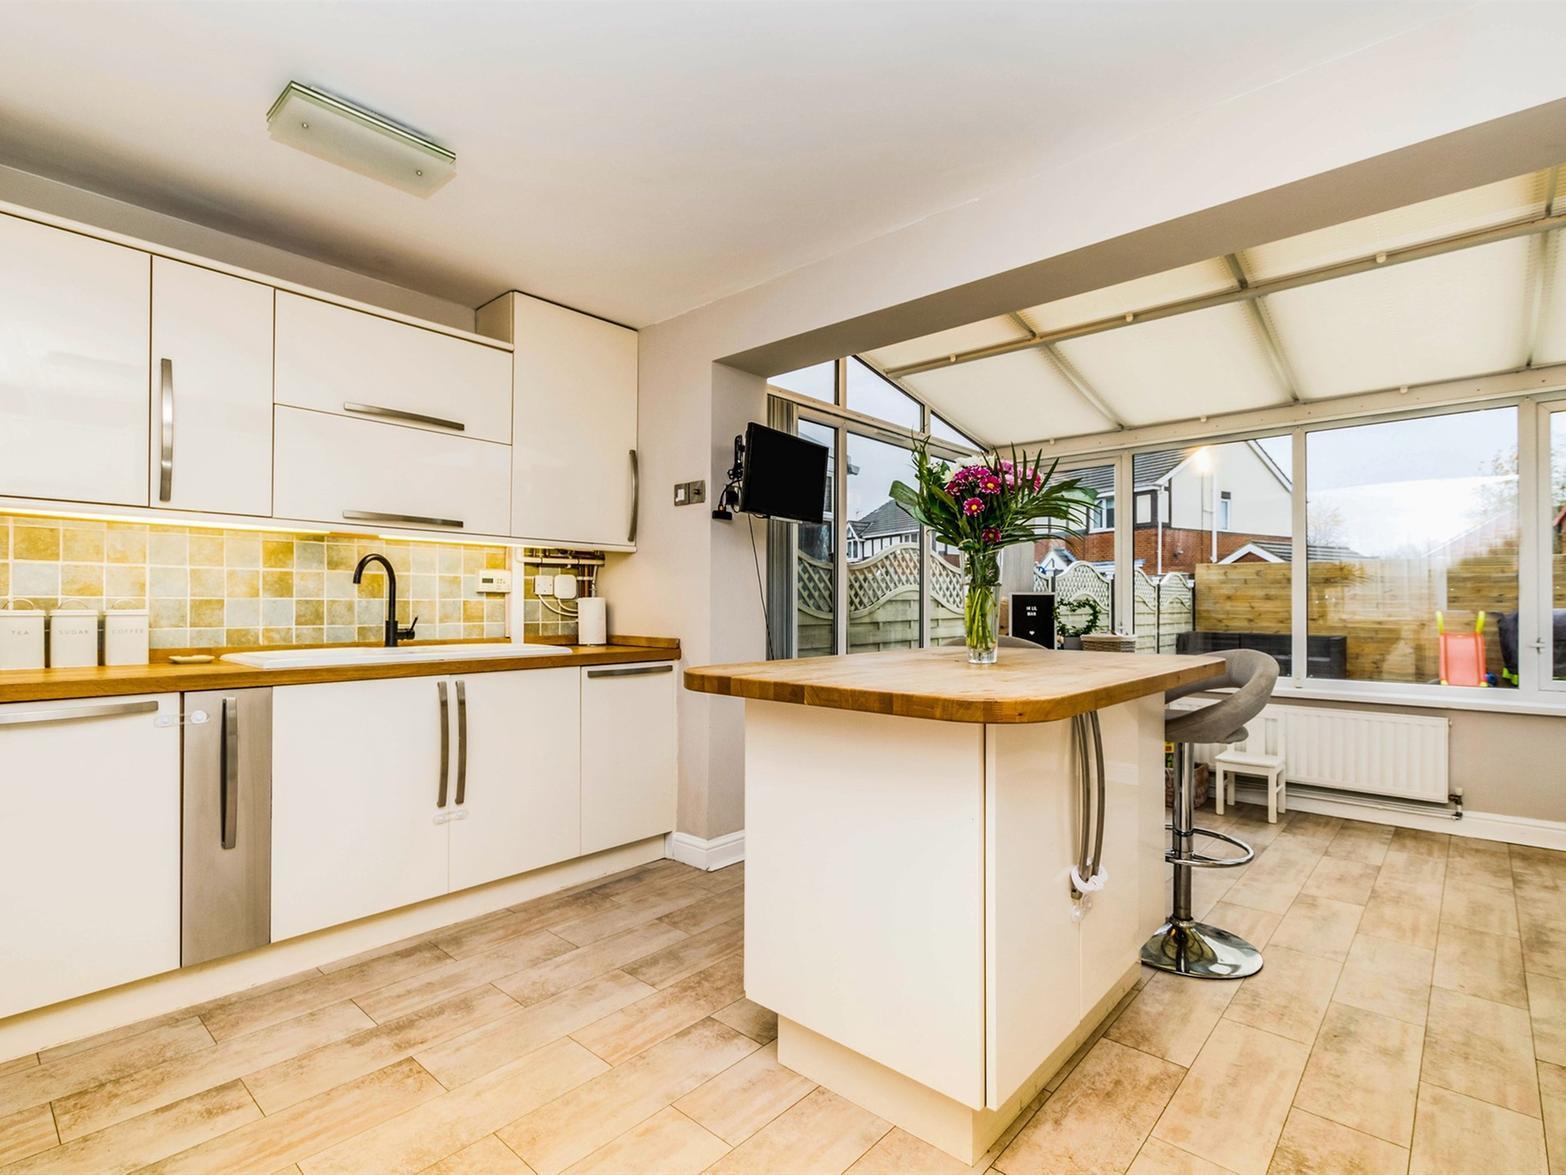 Guide Price 210,000 - 220,000. This beautifully presented three bedroom property is in a brilliant location with close proximity to Waterloo Primary school as well as other local amenities and transport links into both Leeds and Bradford. The property offers ample living accommodation throughout.